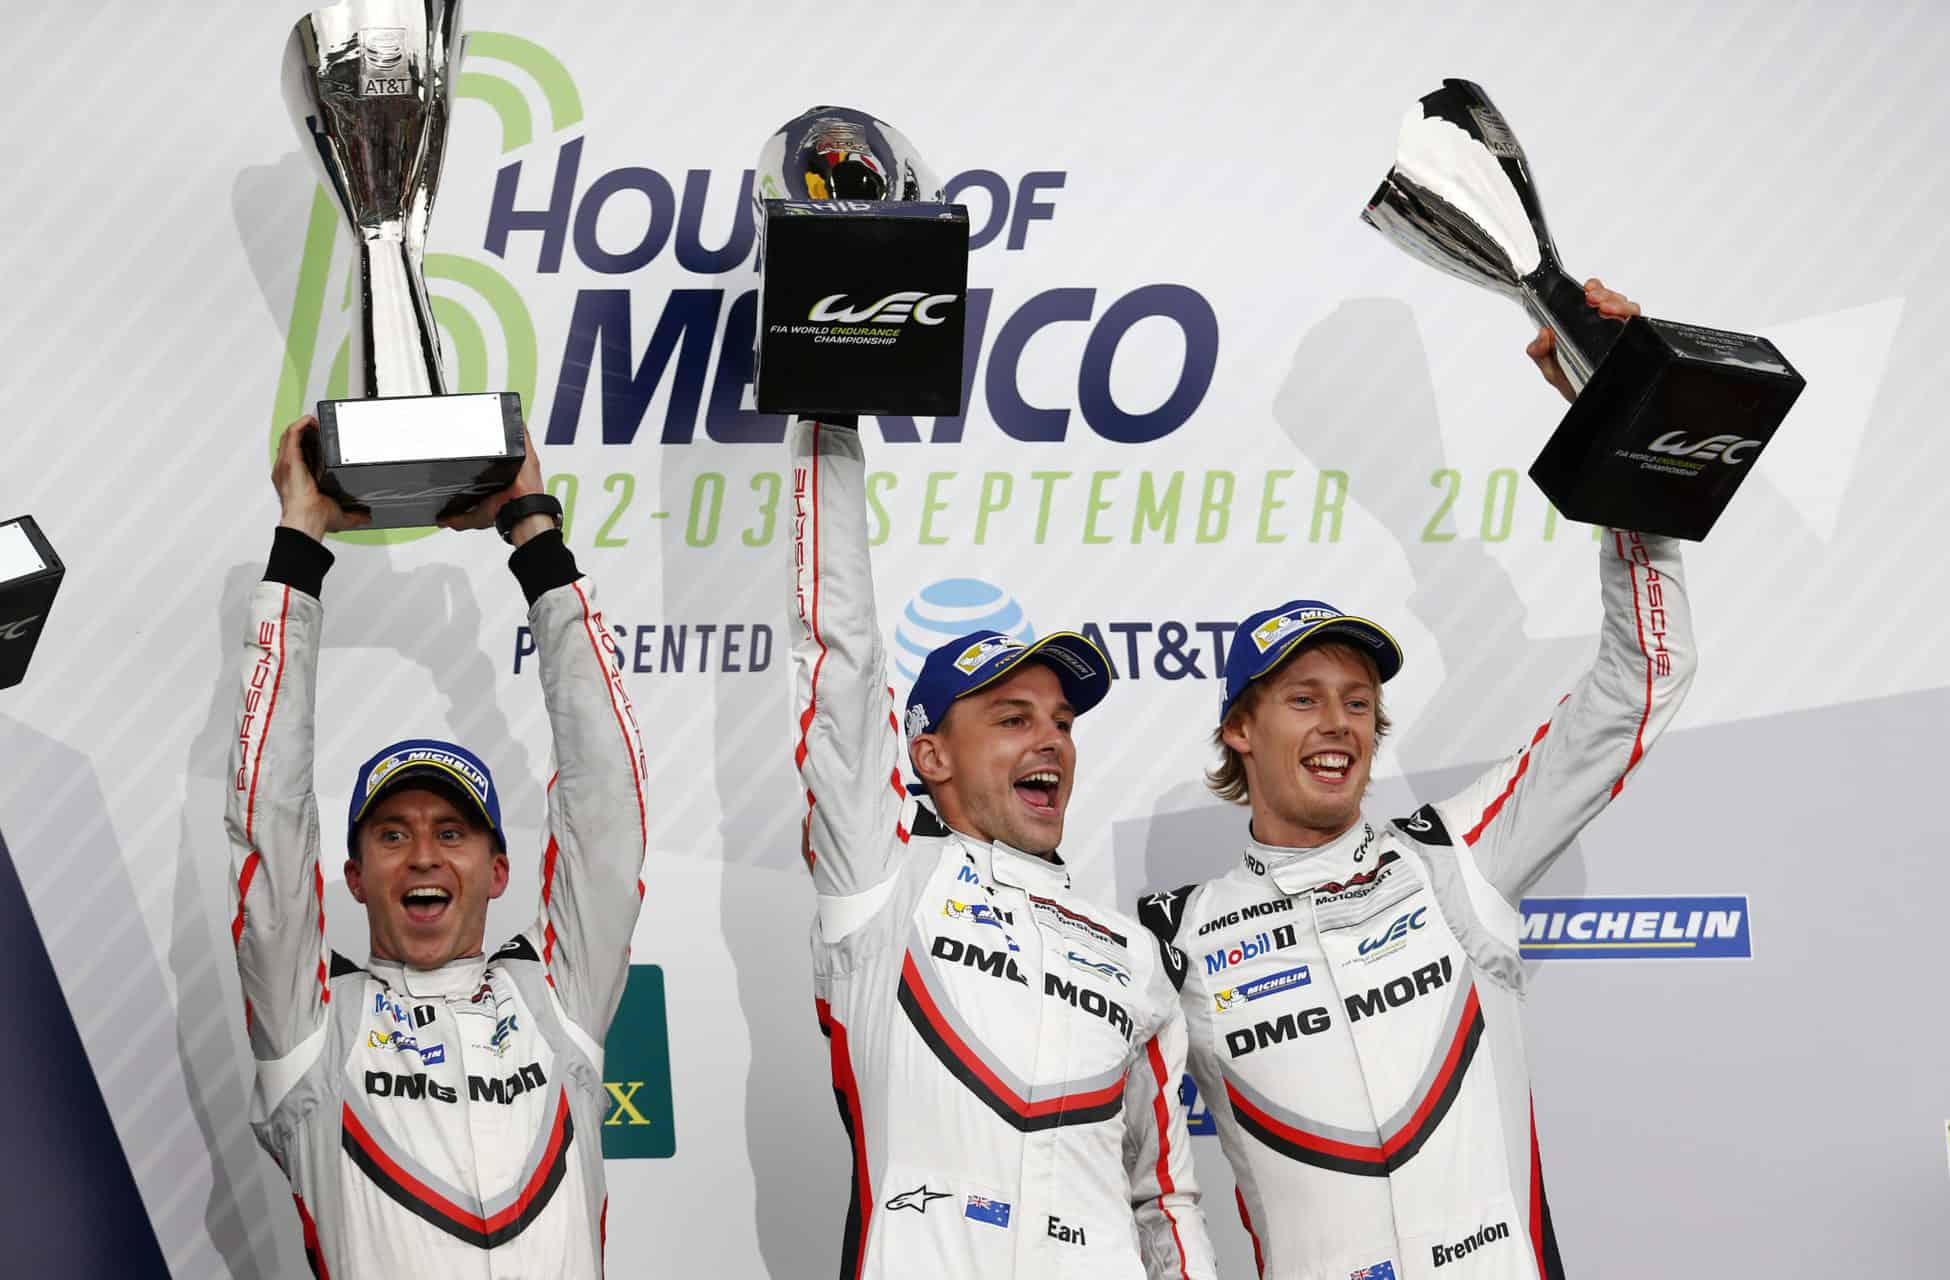 Porsche with its official timing partner Chopard still dominates the WEC 2017 with a one-two victory at the 6 Hours of Mexico 2017